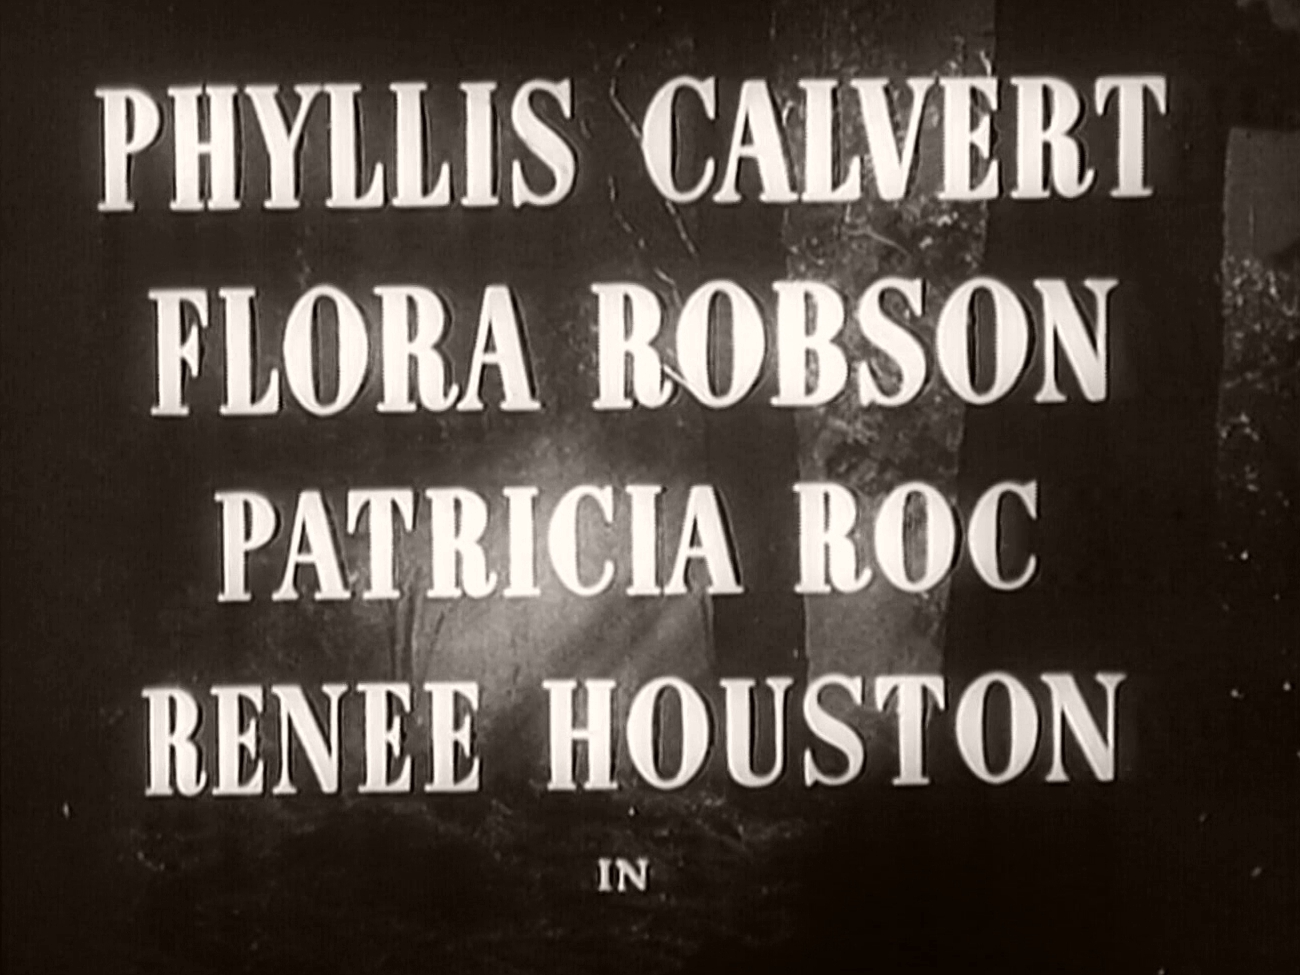 Main title from Two Thousand Women (1944) (1). Phyllis Calvert, Flora Robson, Patricia Roc, Renee Houston in